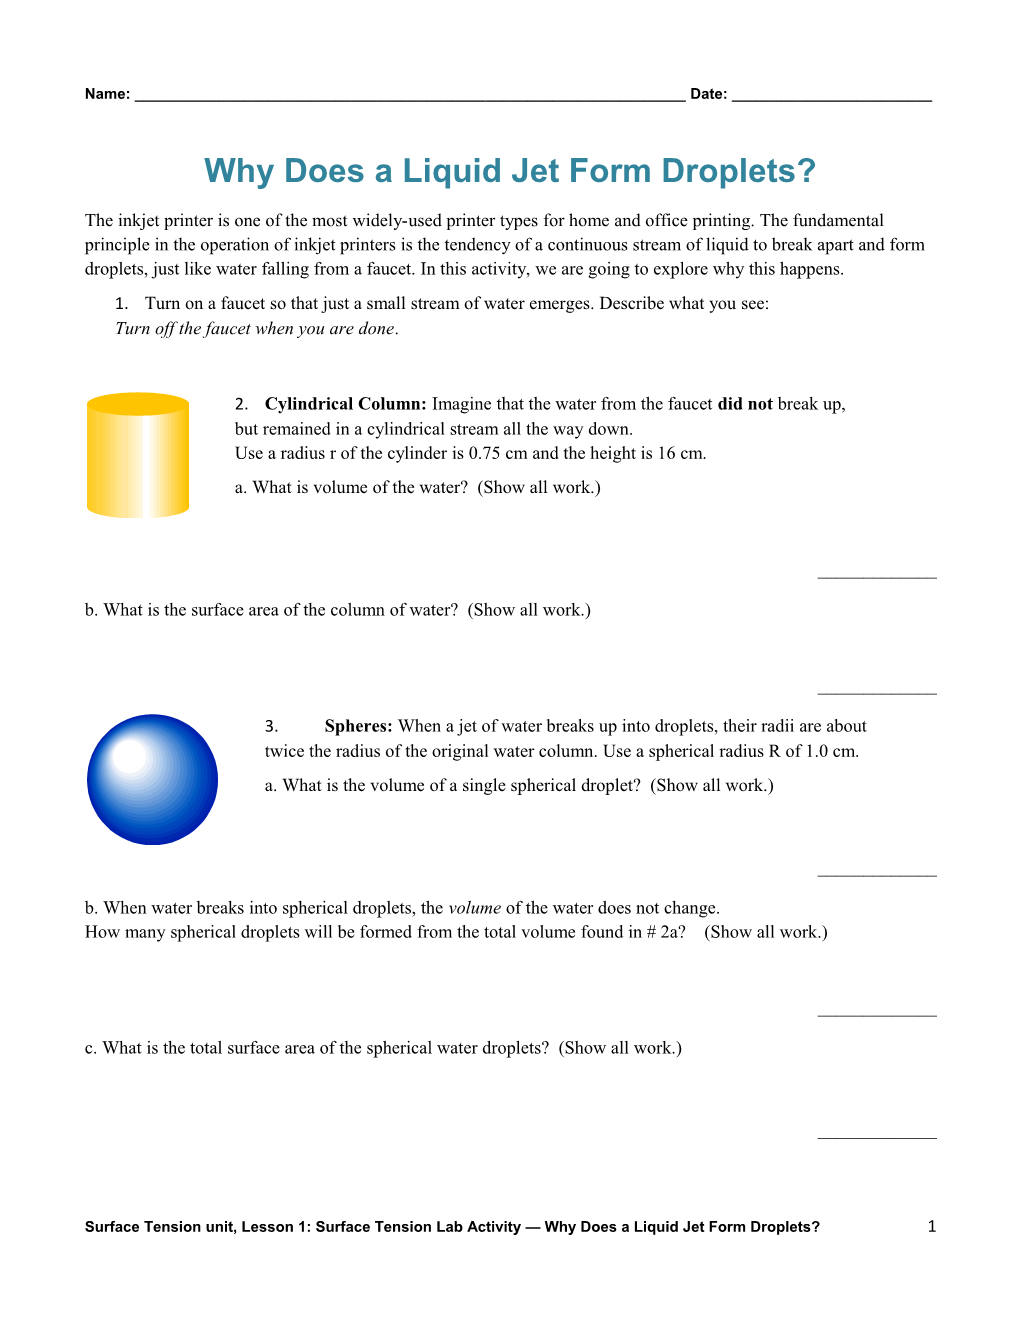 Why Does a Liquid Jet Form Droplets?